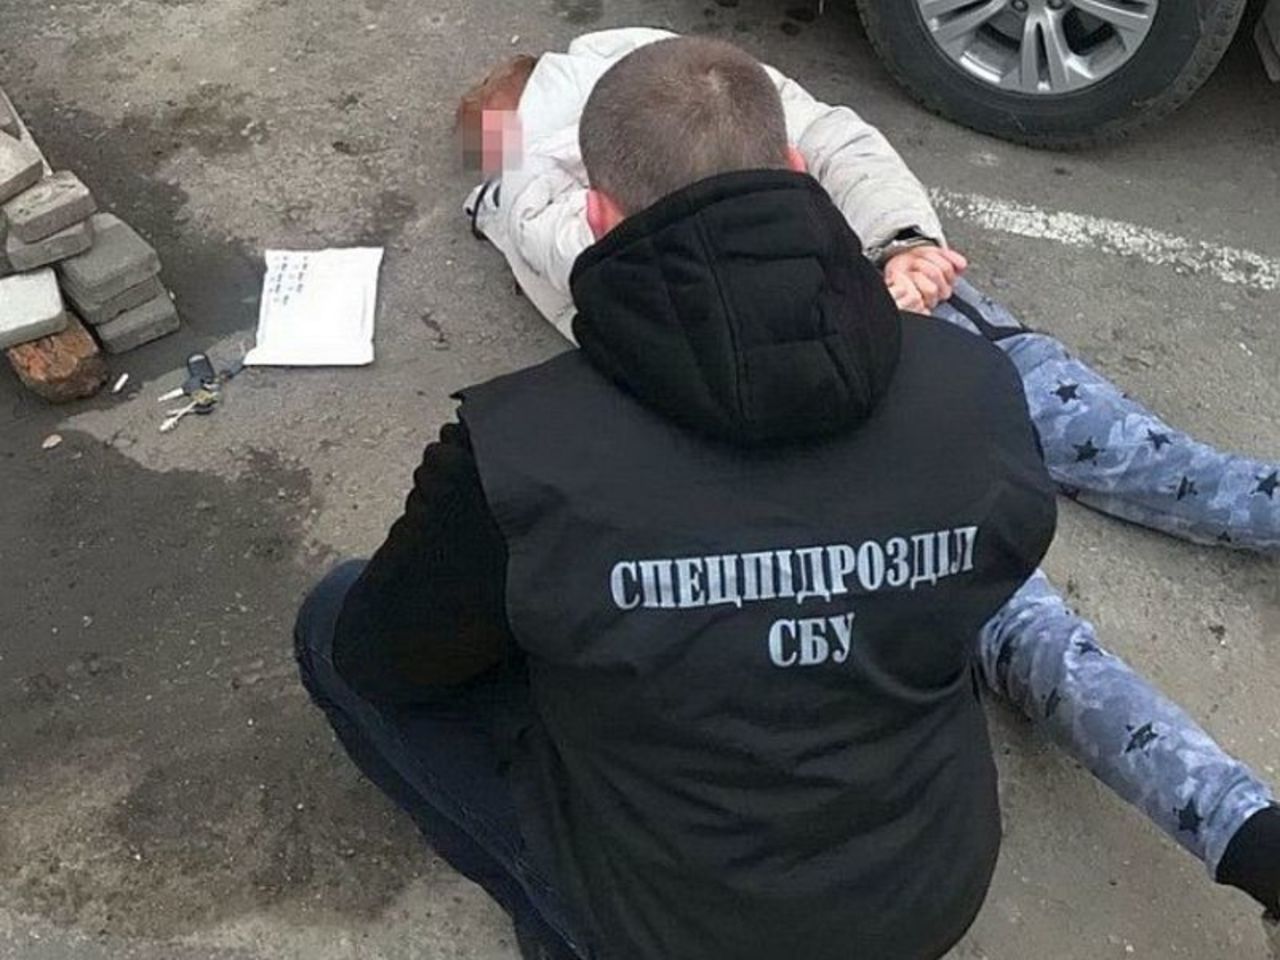 SBU conducts counterintelligence operation in the government quarter of Kyiv